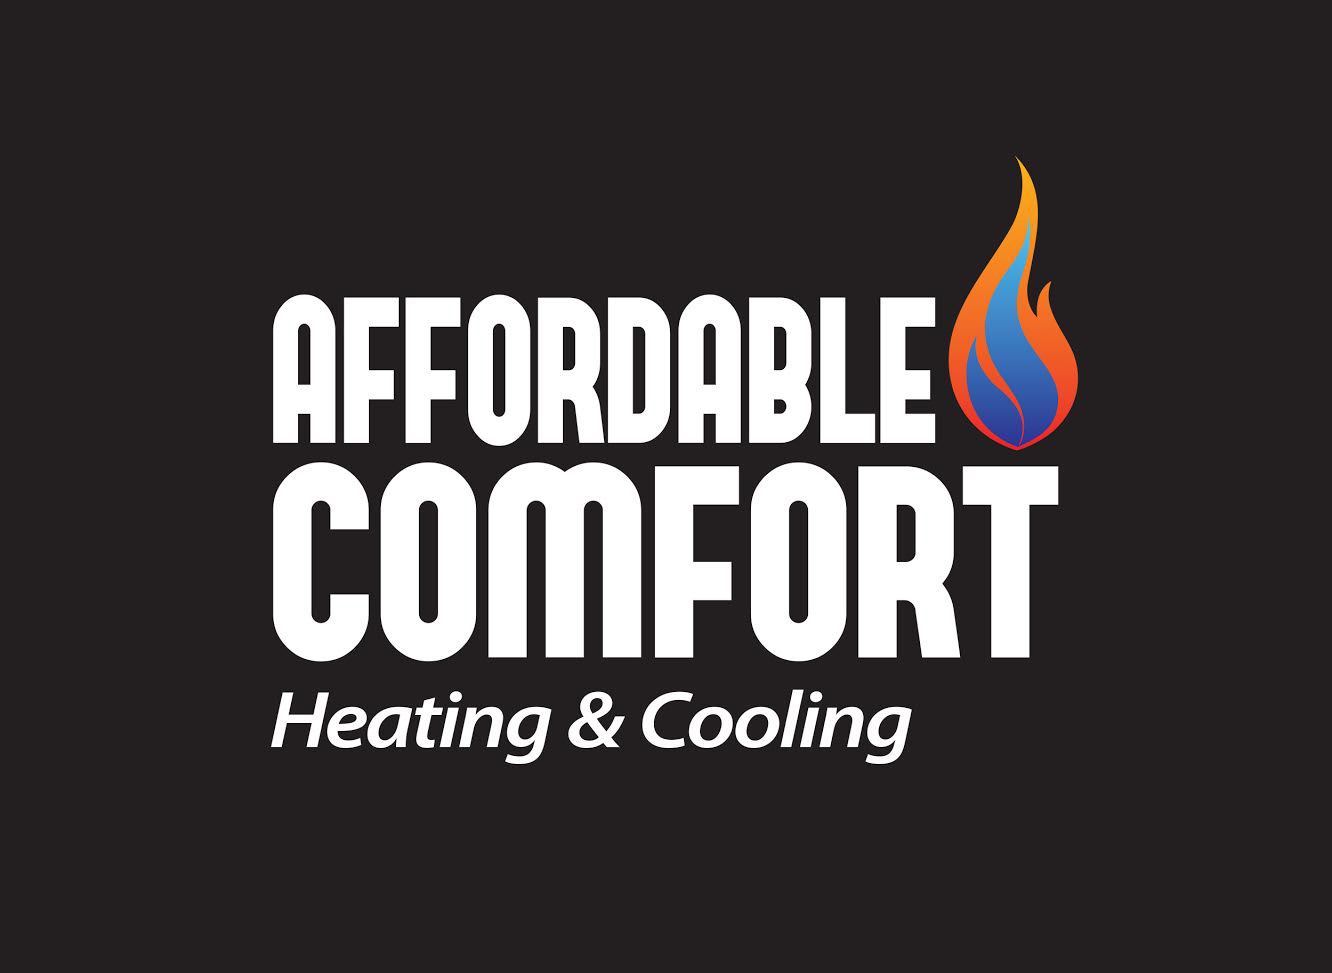 Affordable Comfort Heating And Cooling's logo